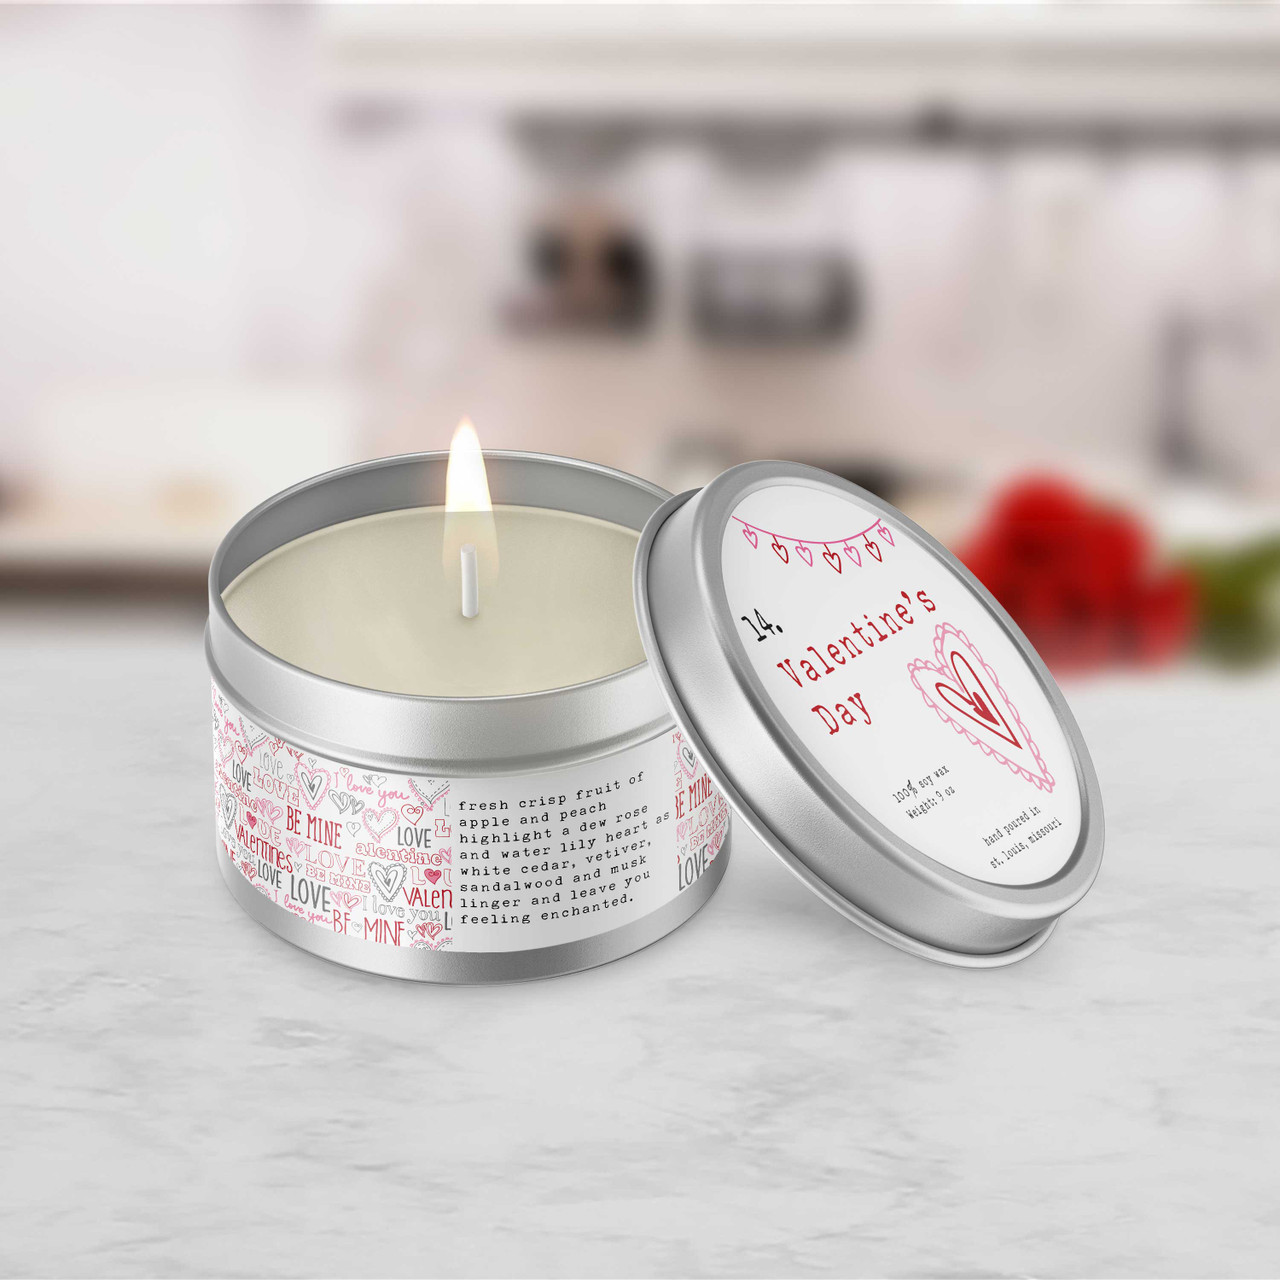 Be My Valentine Candle - FOLD goods